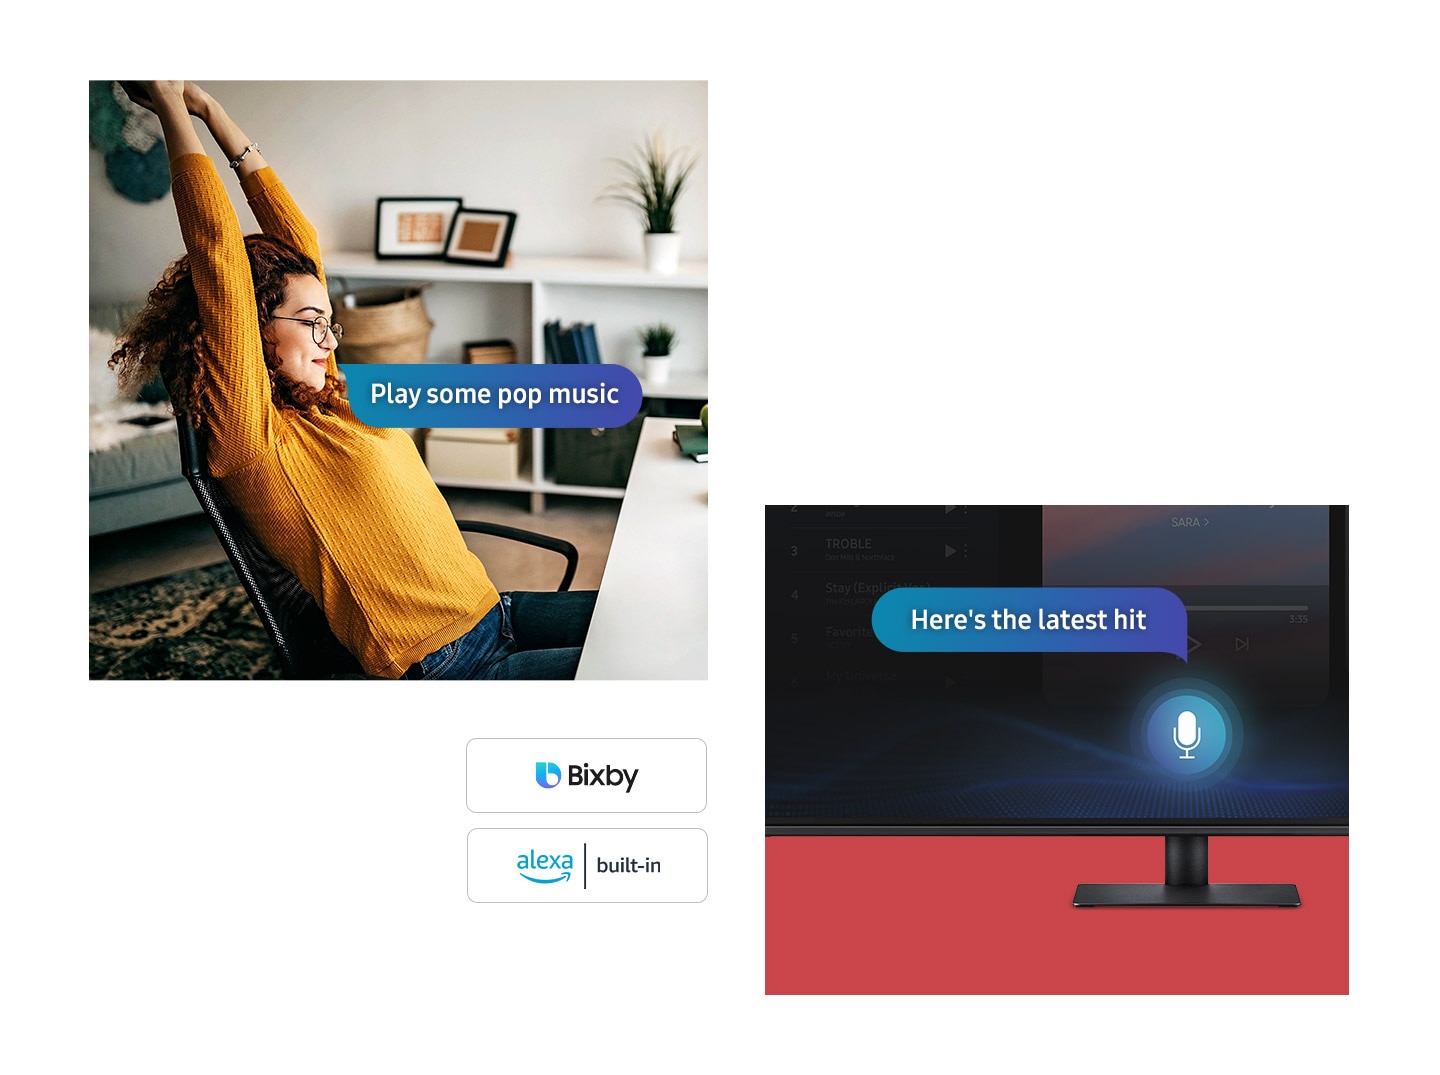 Samsung Smart Monitor M7 supports multiple voice assistants such as Alexa built-in and Bixby. A woman sits in a chair at her desk with a word bubble next to her has the text "Play some pop music". On the monitor screen next to a microphone icon, a word bubble has the text "Here's the latest hit".